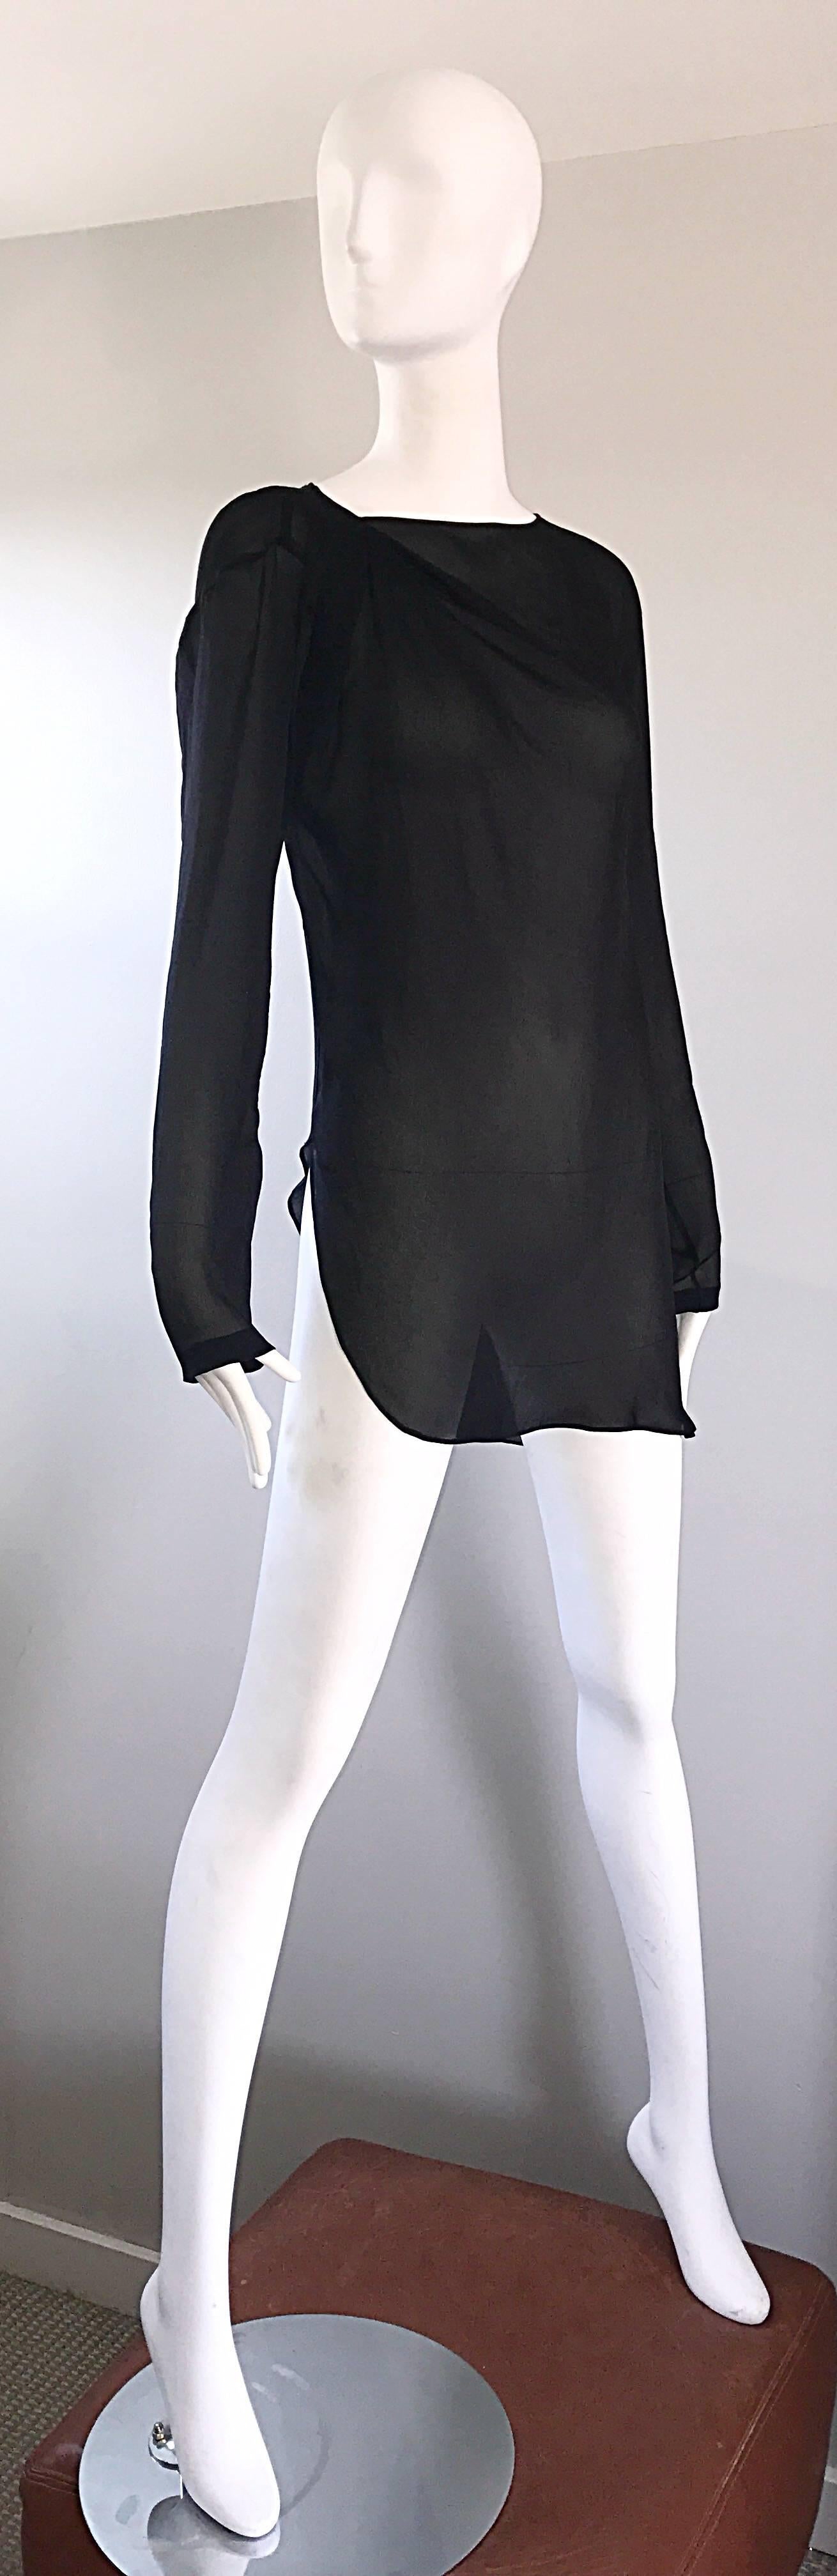 Wonderful vintage HALSTON black silk chiffon semi sheer asymmetrical long sleeve tunic top (NEW WITH ORIGINAL TAGS)! Intricate ruching detail at the neck. Asymmetrical hem is longer on the right side. Great with jeans or shorts, or perfect for the